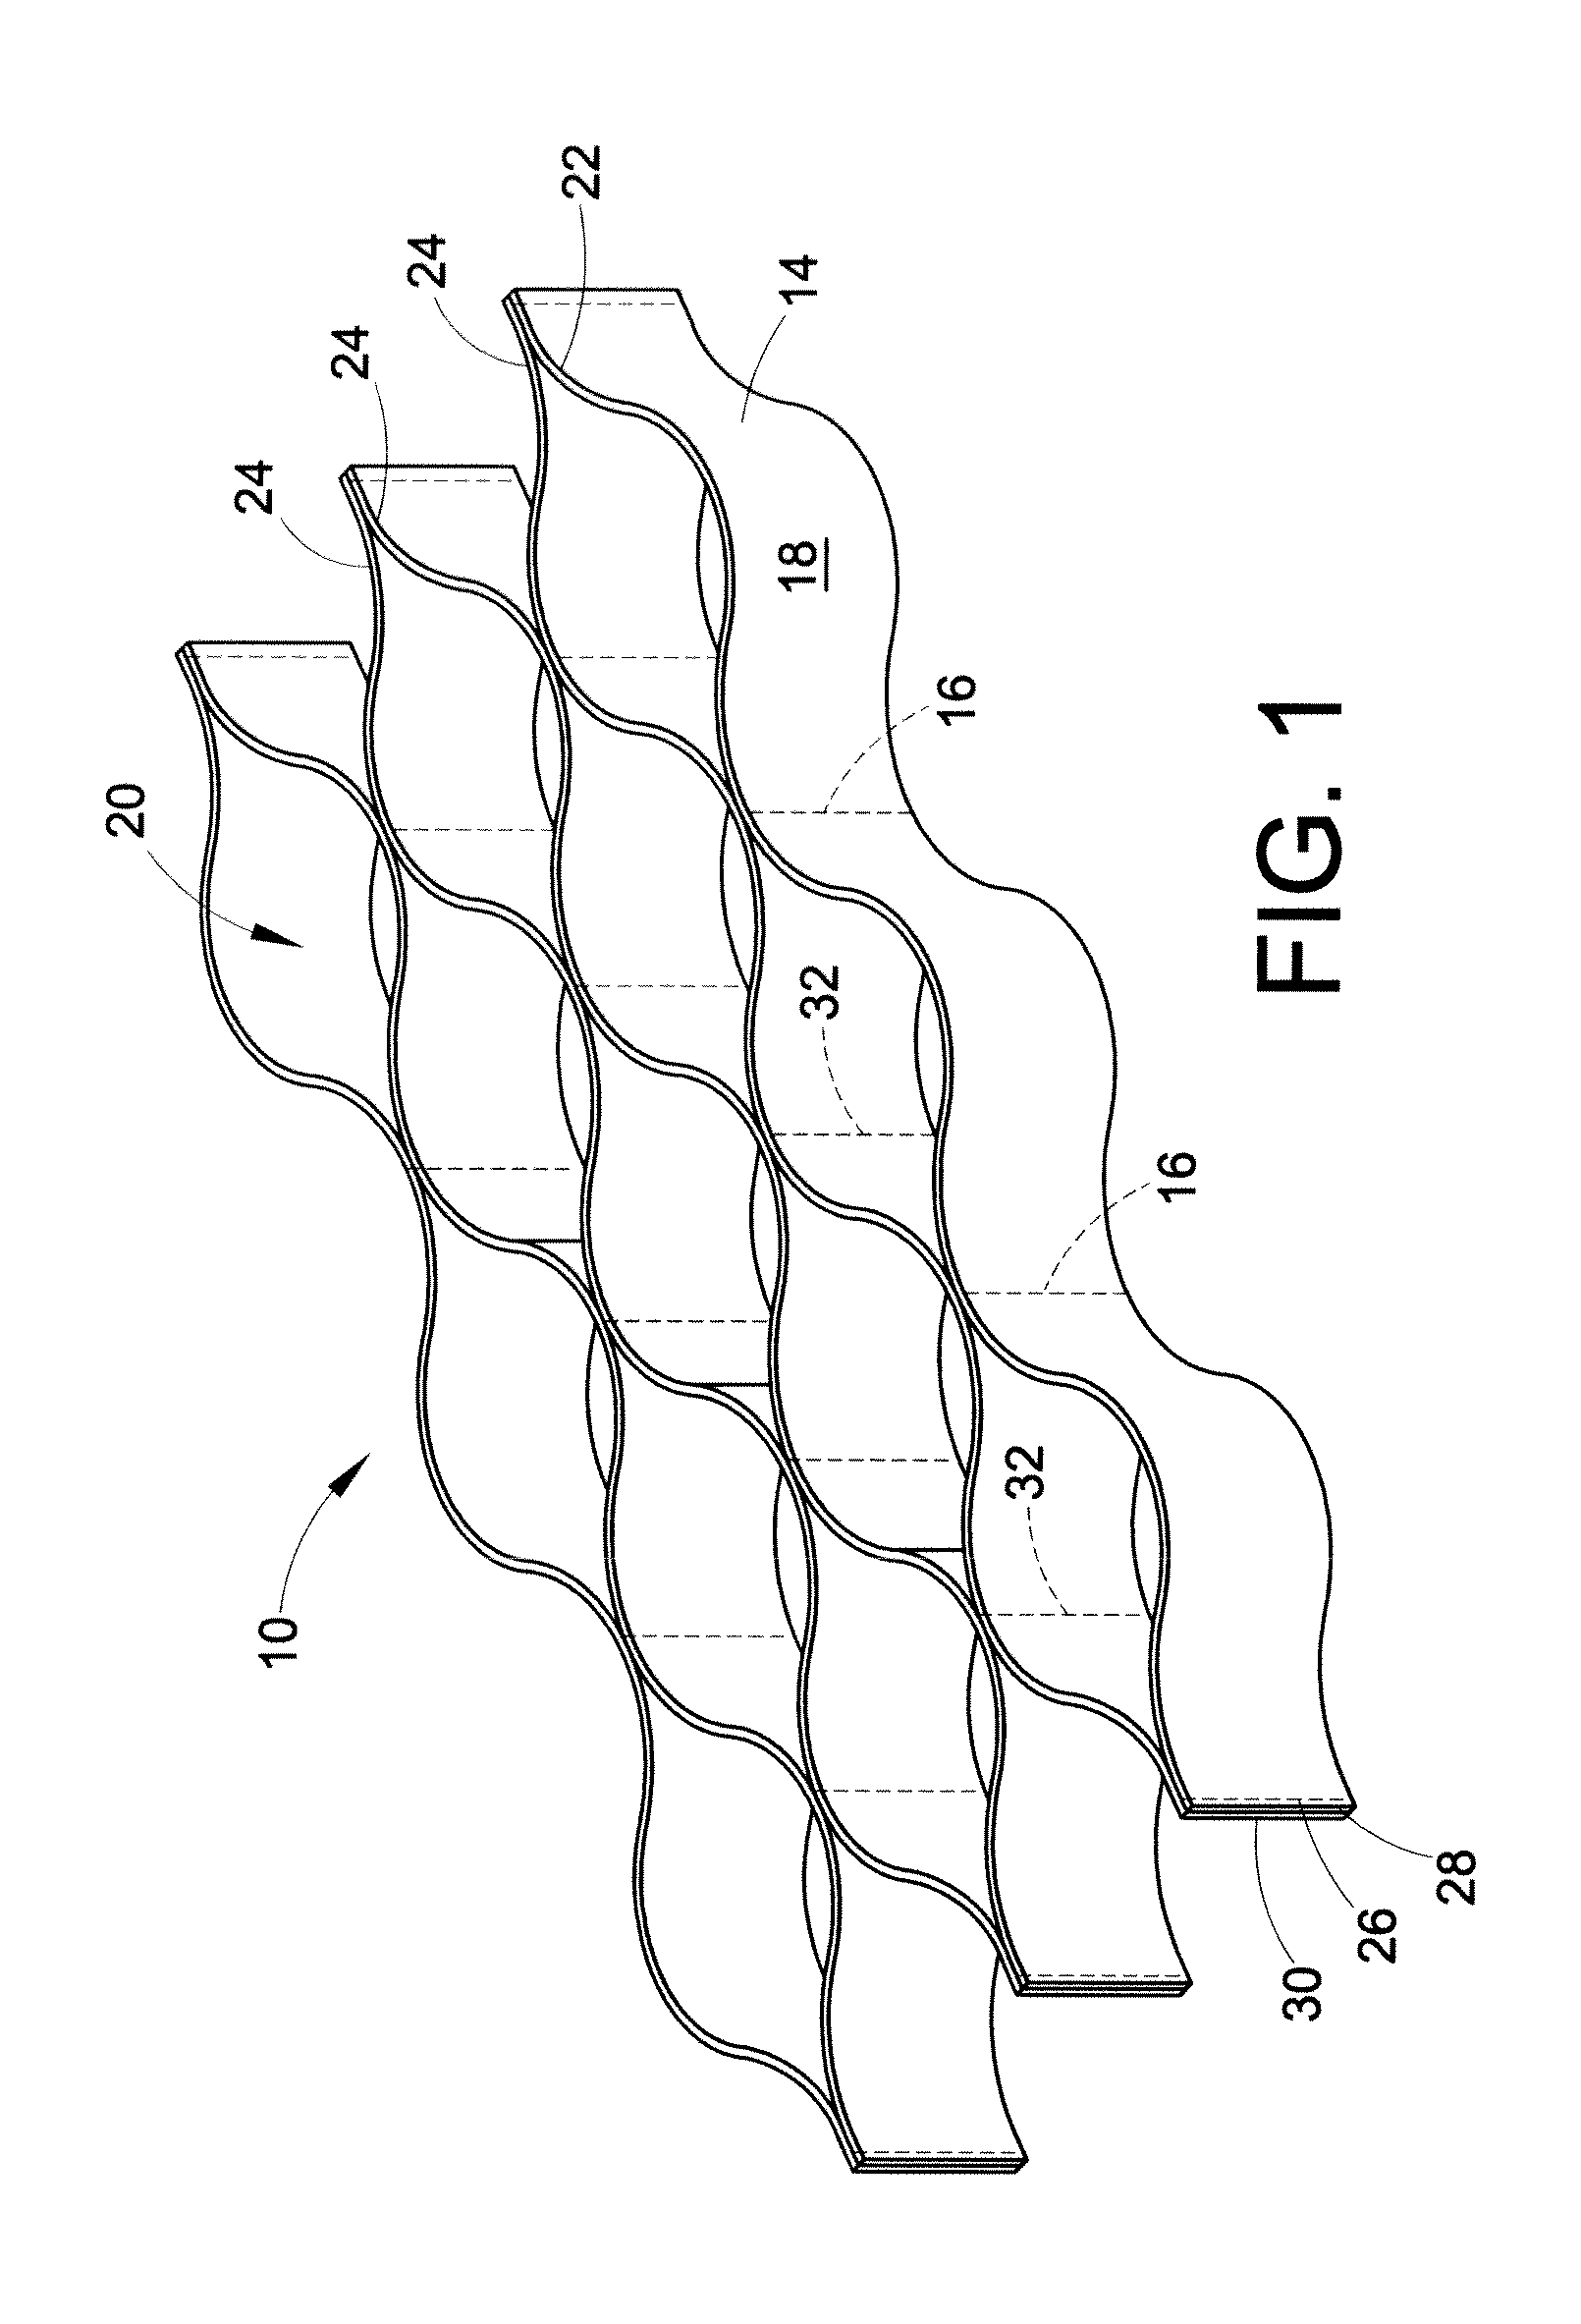 Geotechnical structures and processes for forming the same